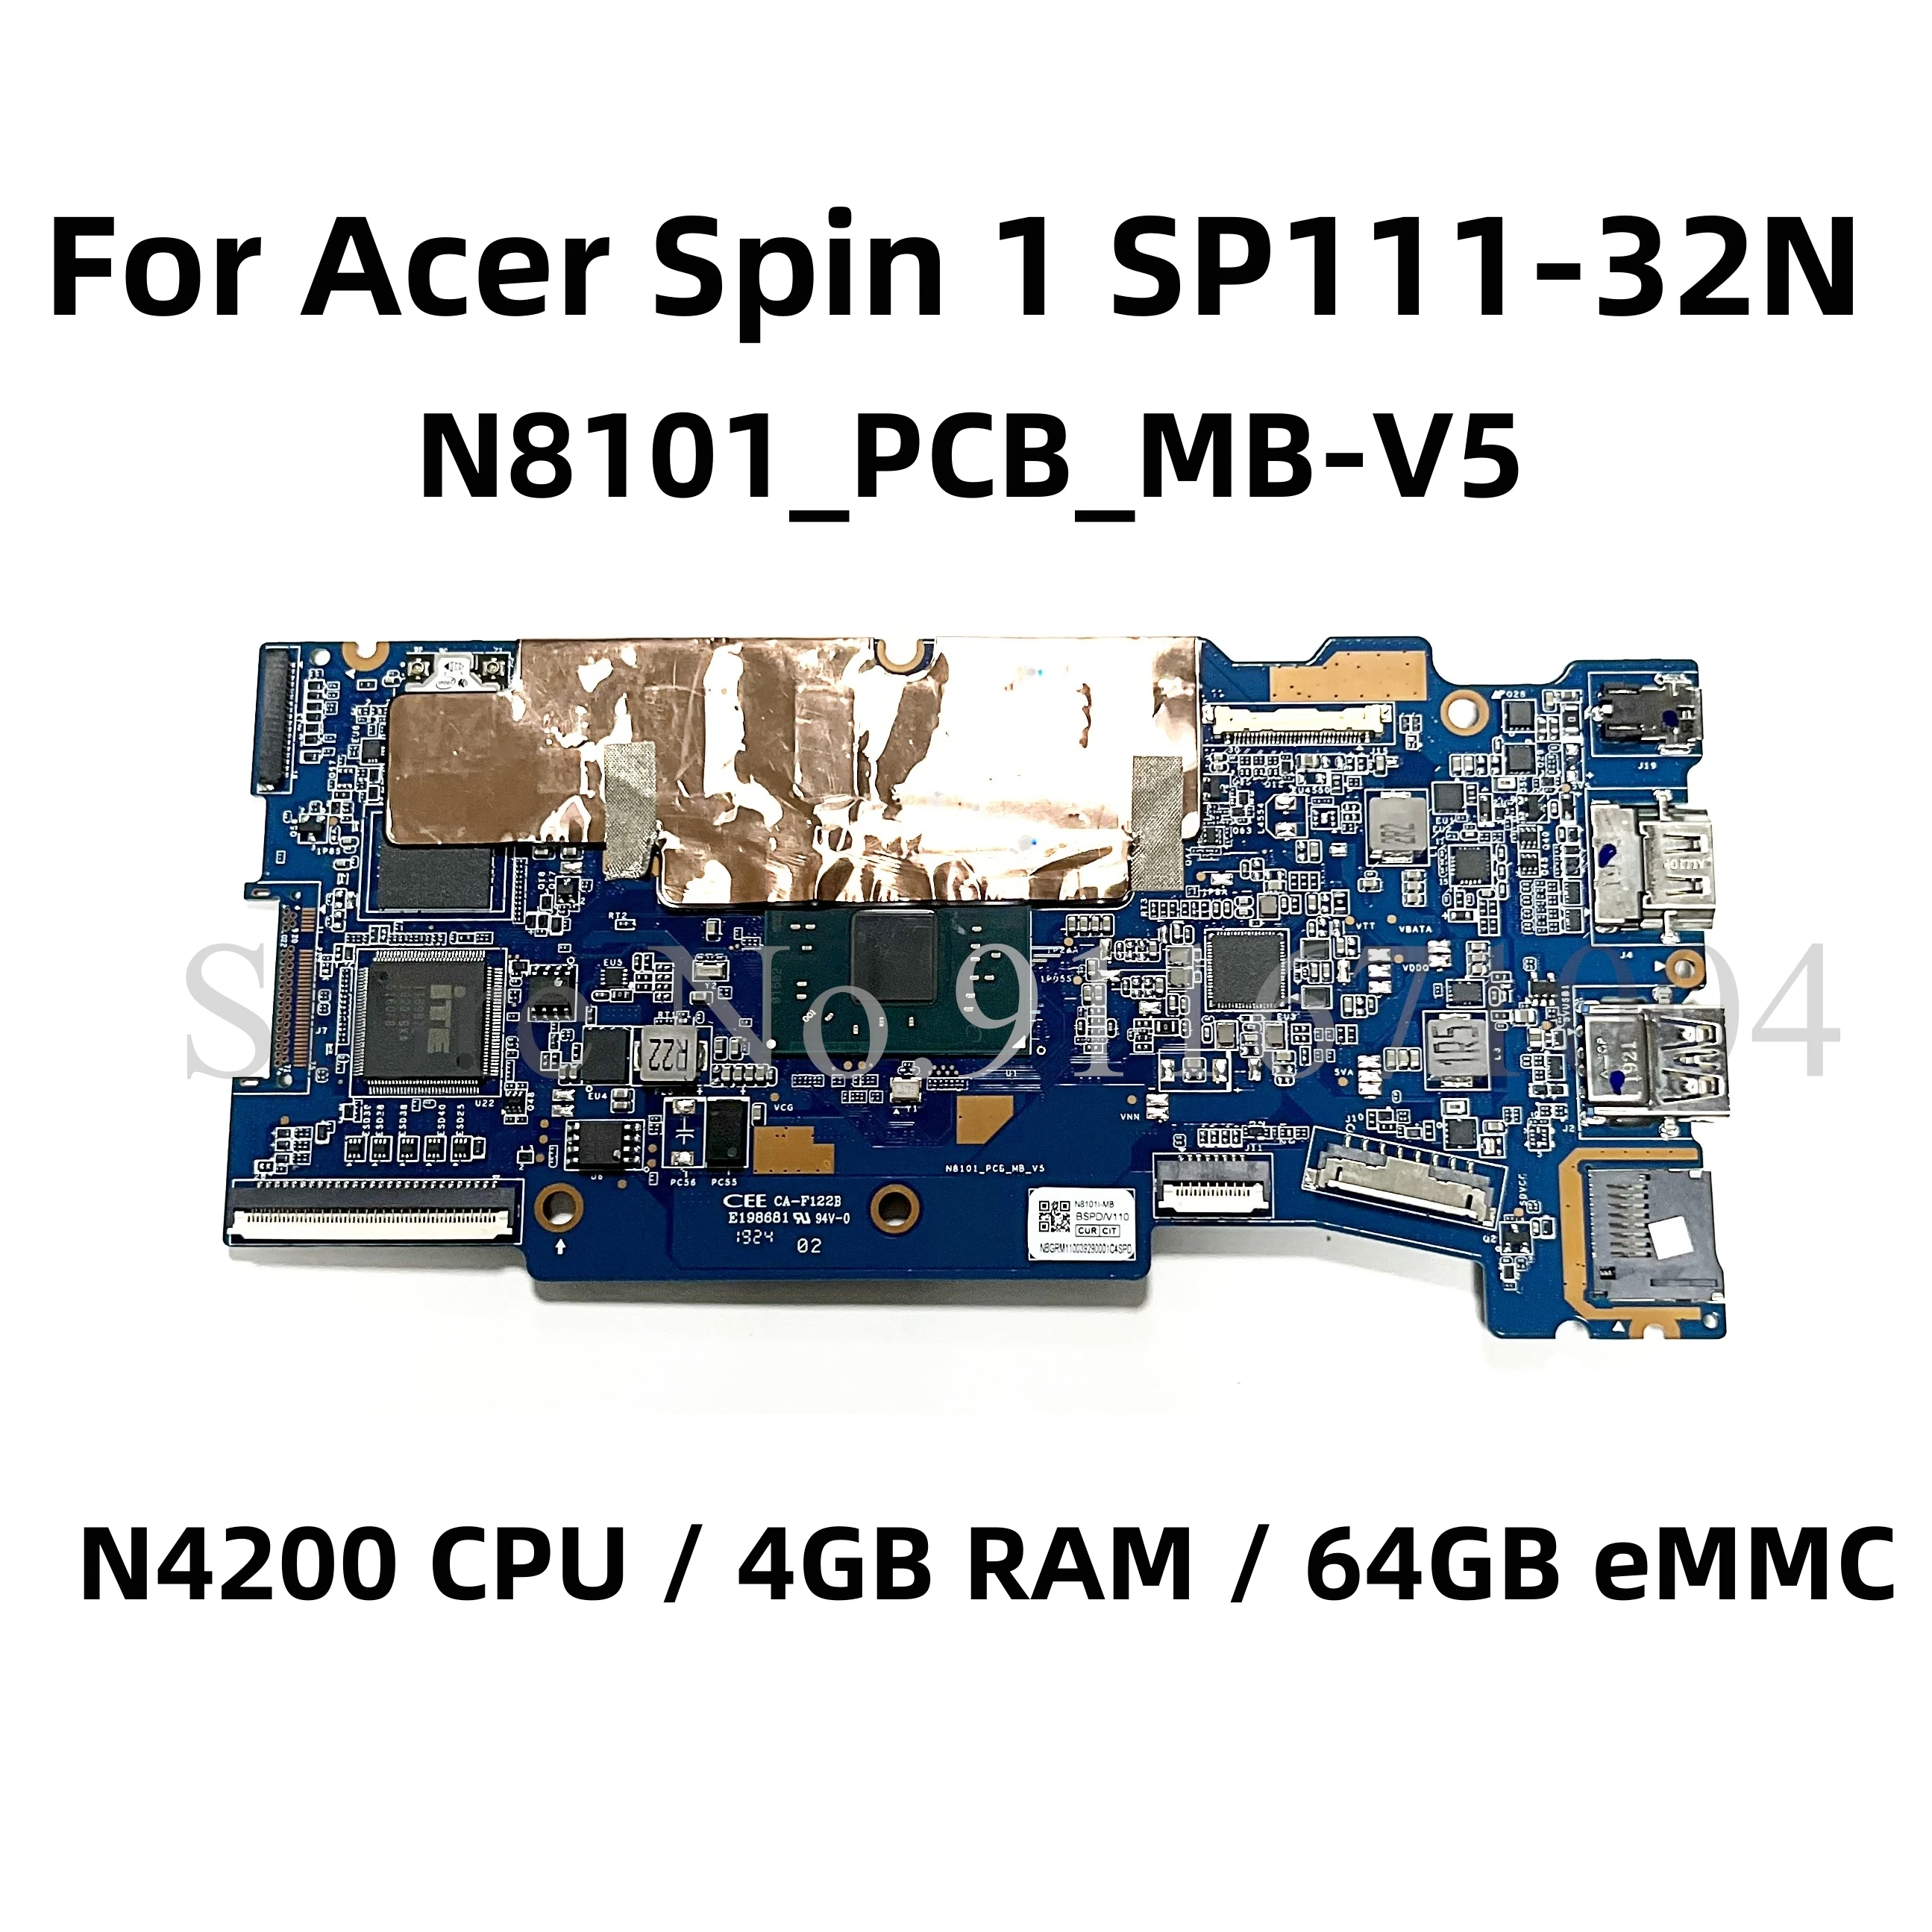 

For Acer Spin 1 SP111-32N Laptop Motherboard With N4200 CPU 4GB Memory 64GB eMMC N8101_PCB_MB-V5 NBGRM11004 NBGRM11003